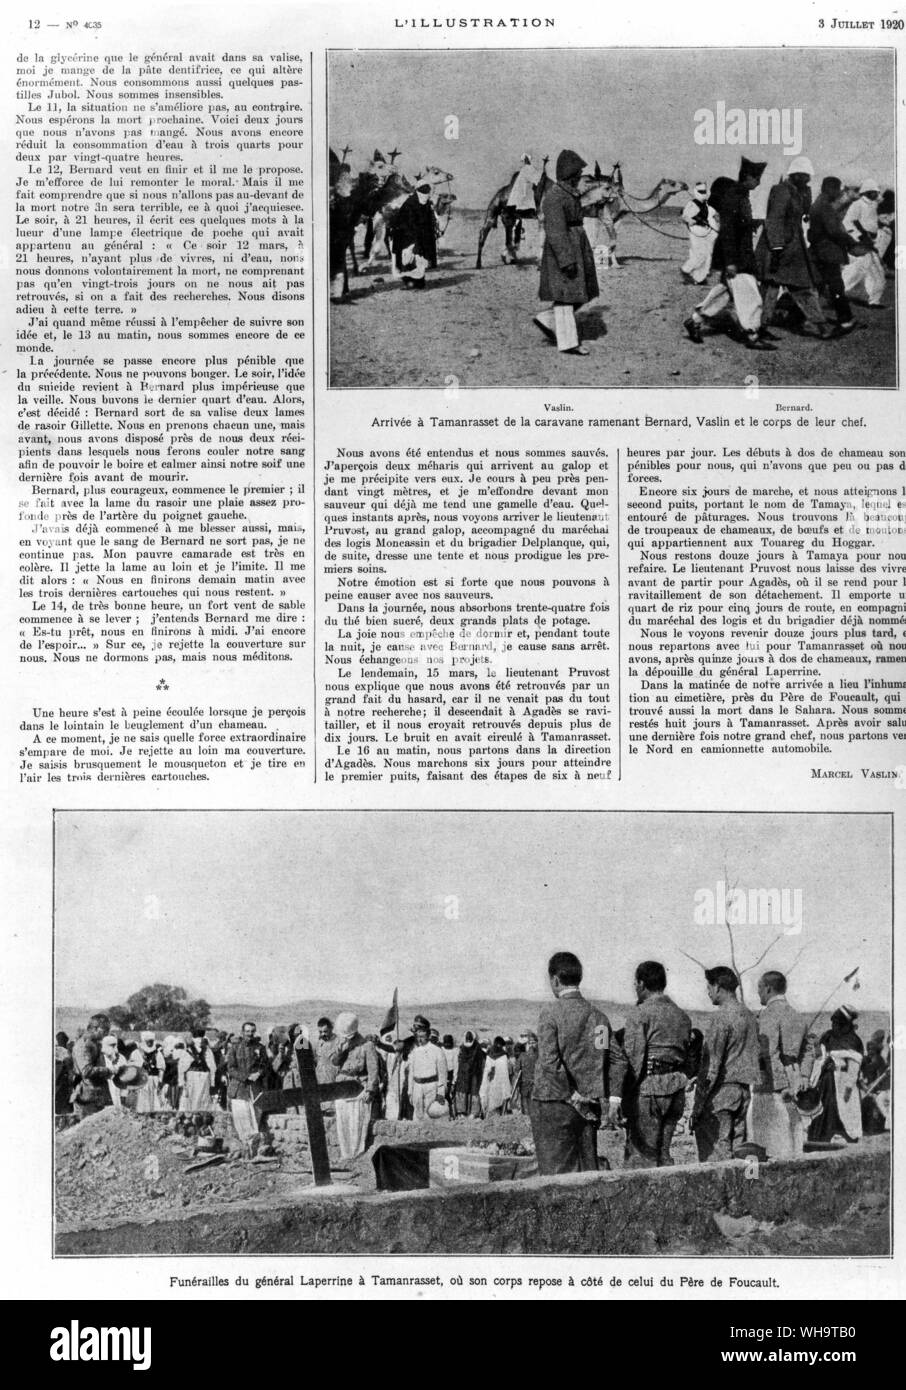 ILN 3rd July 1920: Top right: Arriving at Tamanrasset are the caravans of Bernard Vaslin and the body of their chief. . Bottom left: The funeral of General Lapperine, where his body will rest next to Pere de Foucault. Stock Photo